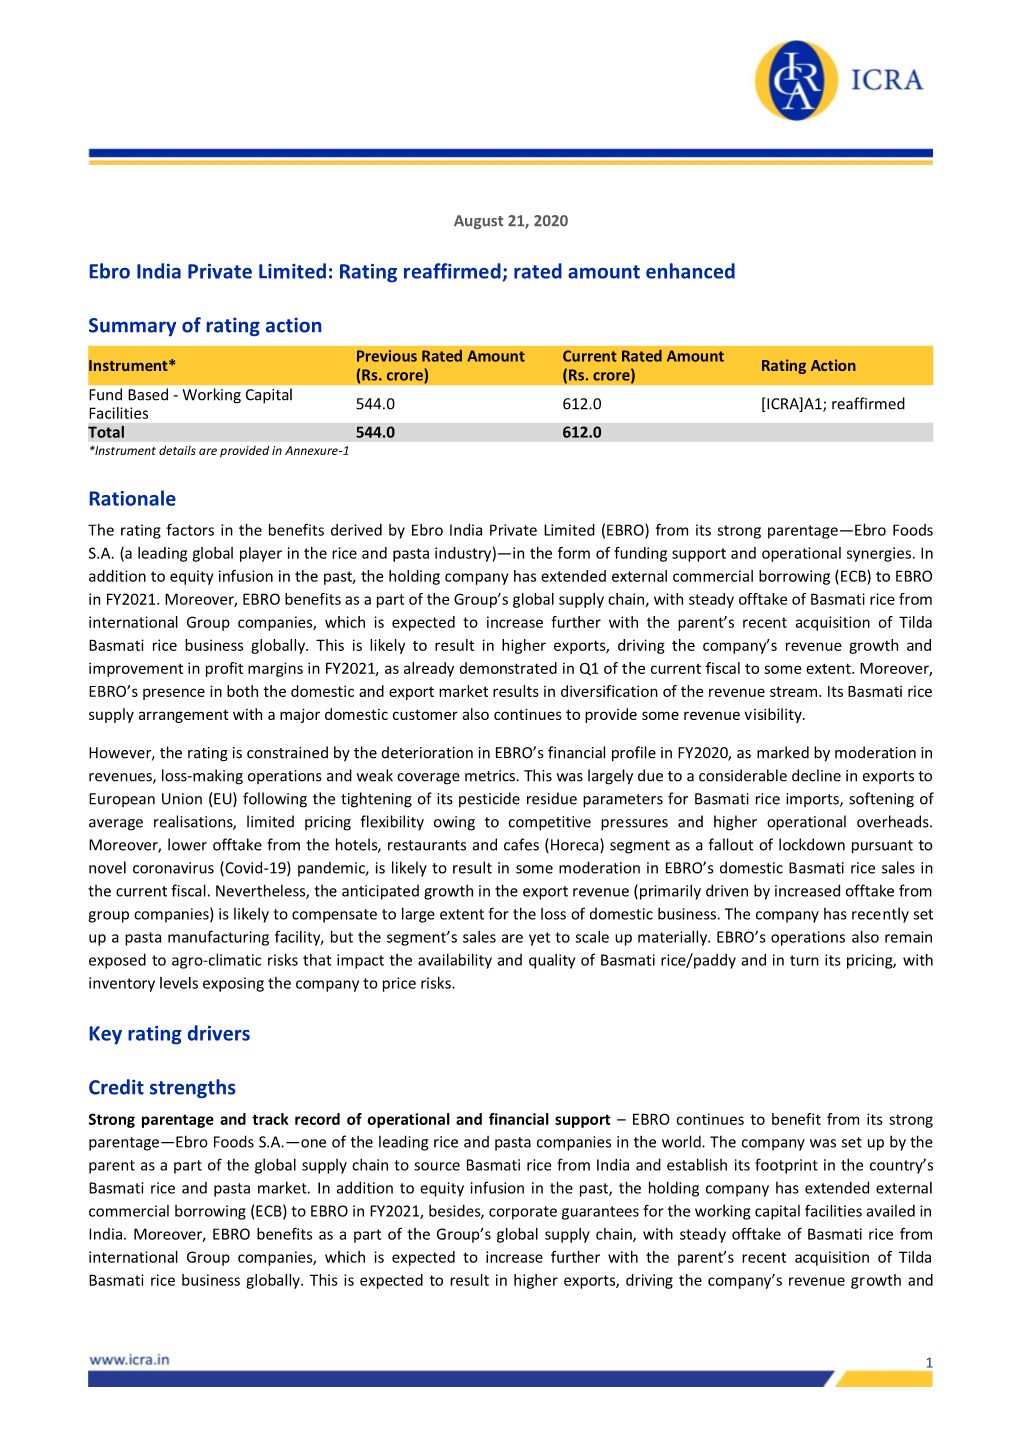 Ebro India Private Limited: Rating Reaffirmed; Rated Amount Enhanced